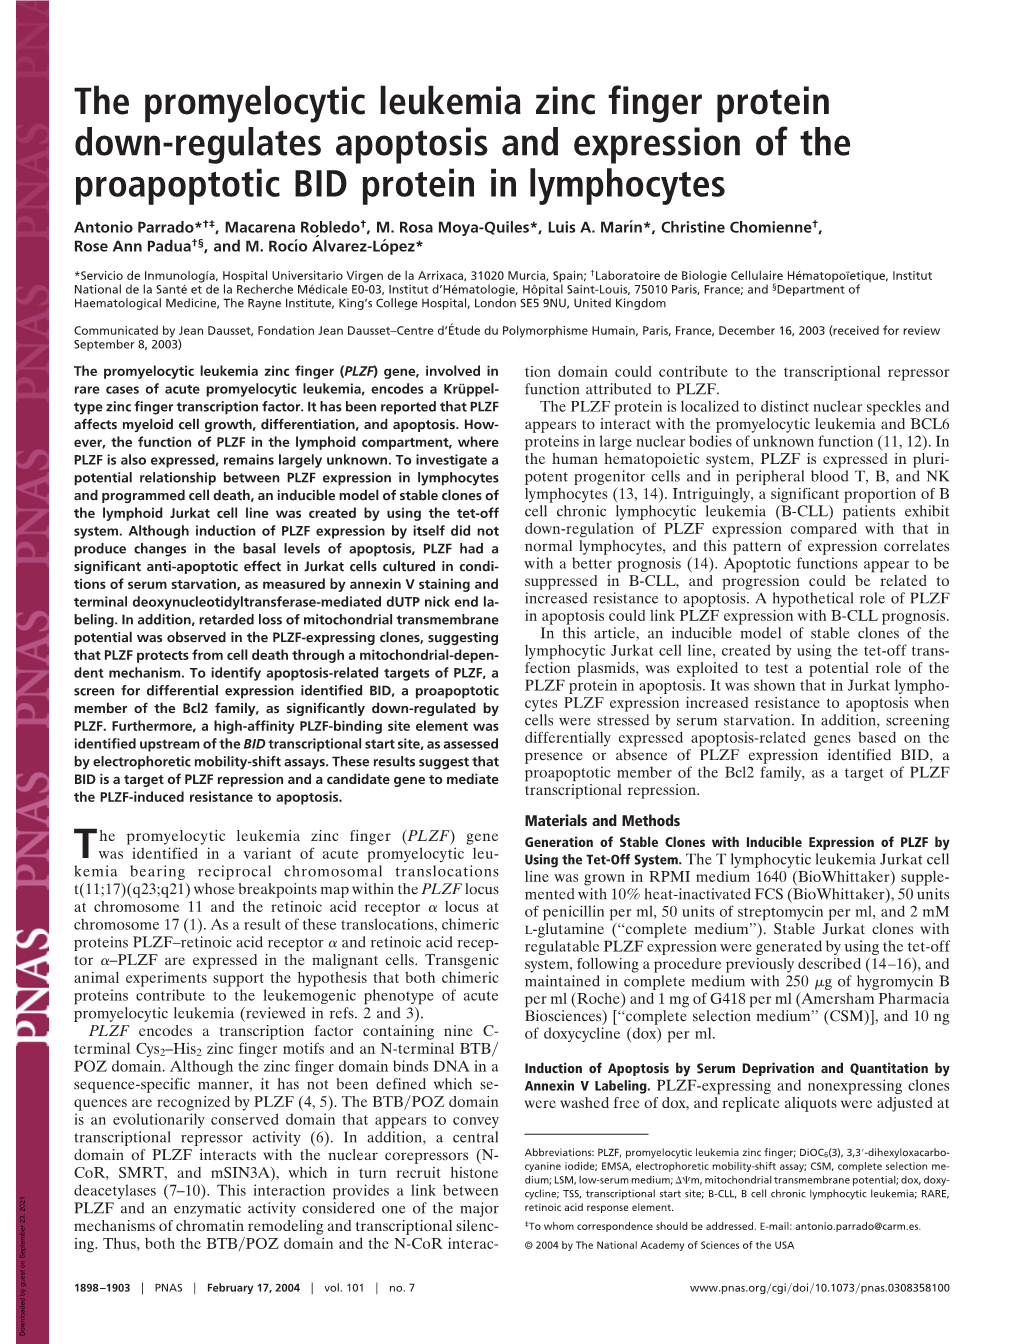 The Promyelocytic Leukemia Zinc Finger Protein Down-Regulates Apoptosis and Expression of the Proapoptotic BID Protein in Lymphocytes